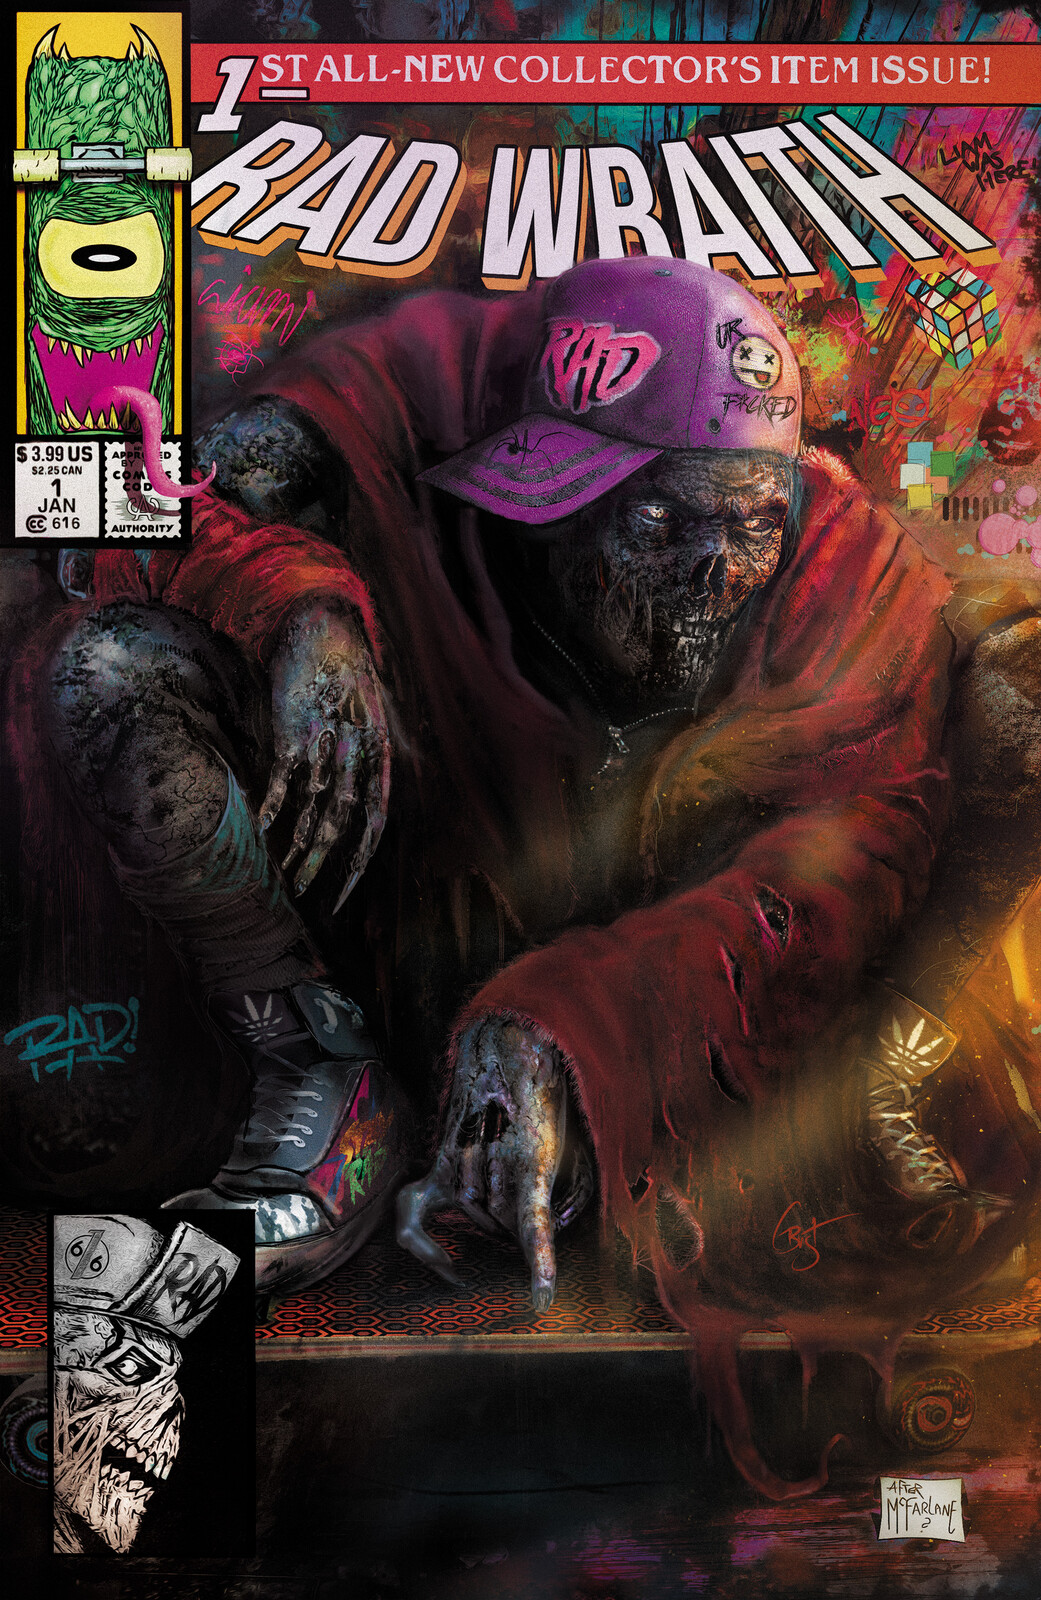 RAD WRAITH #1 COVER 3 McFarlane Homage
Artwork by Christopher Bust